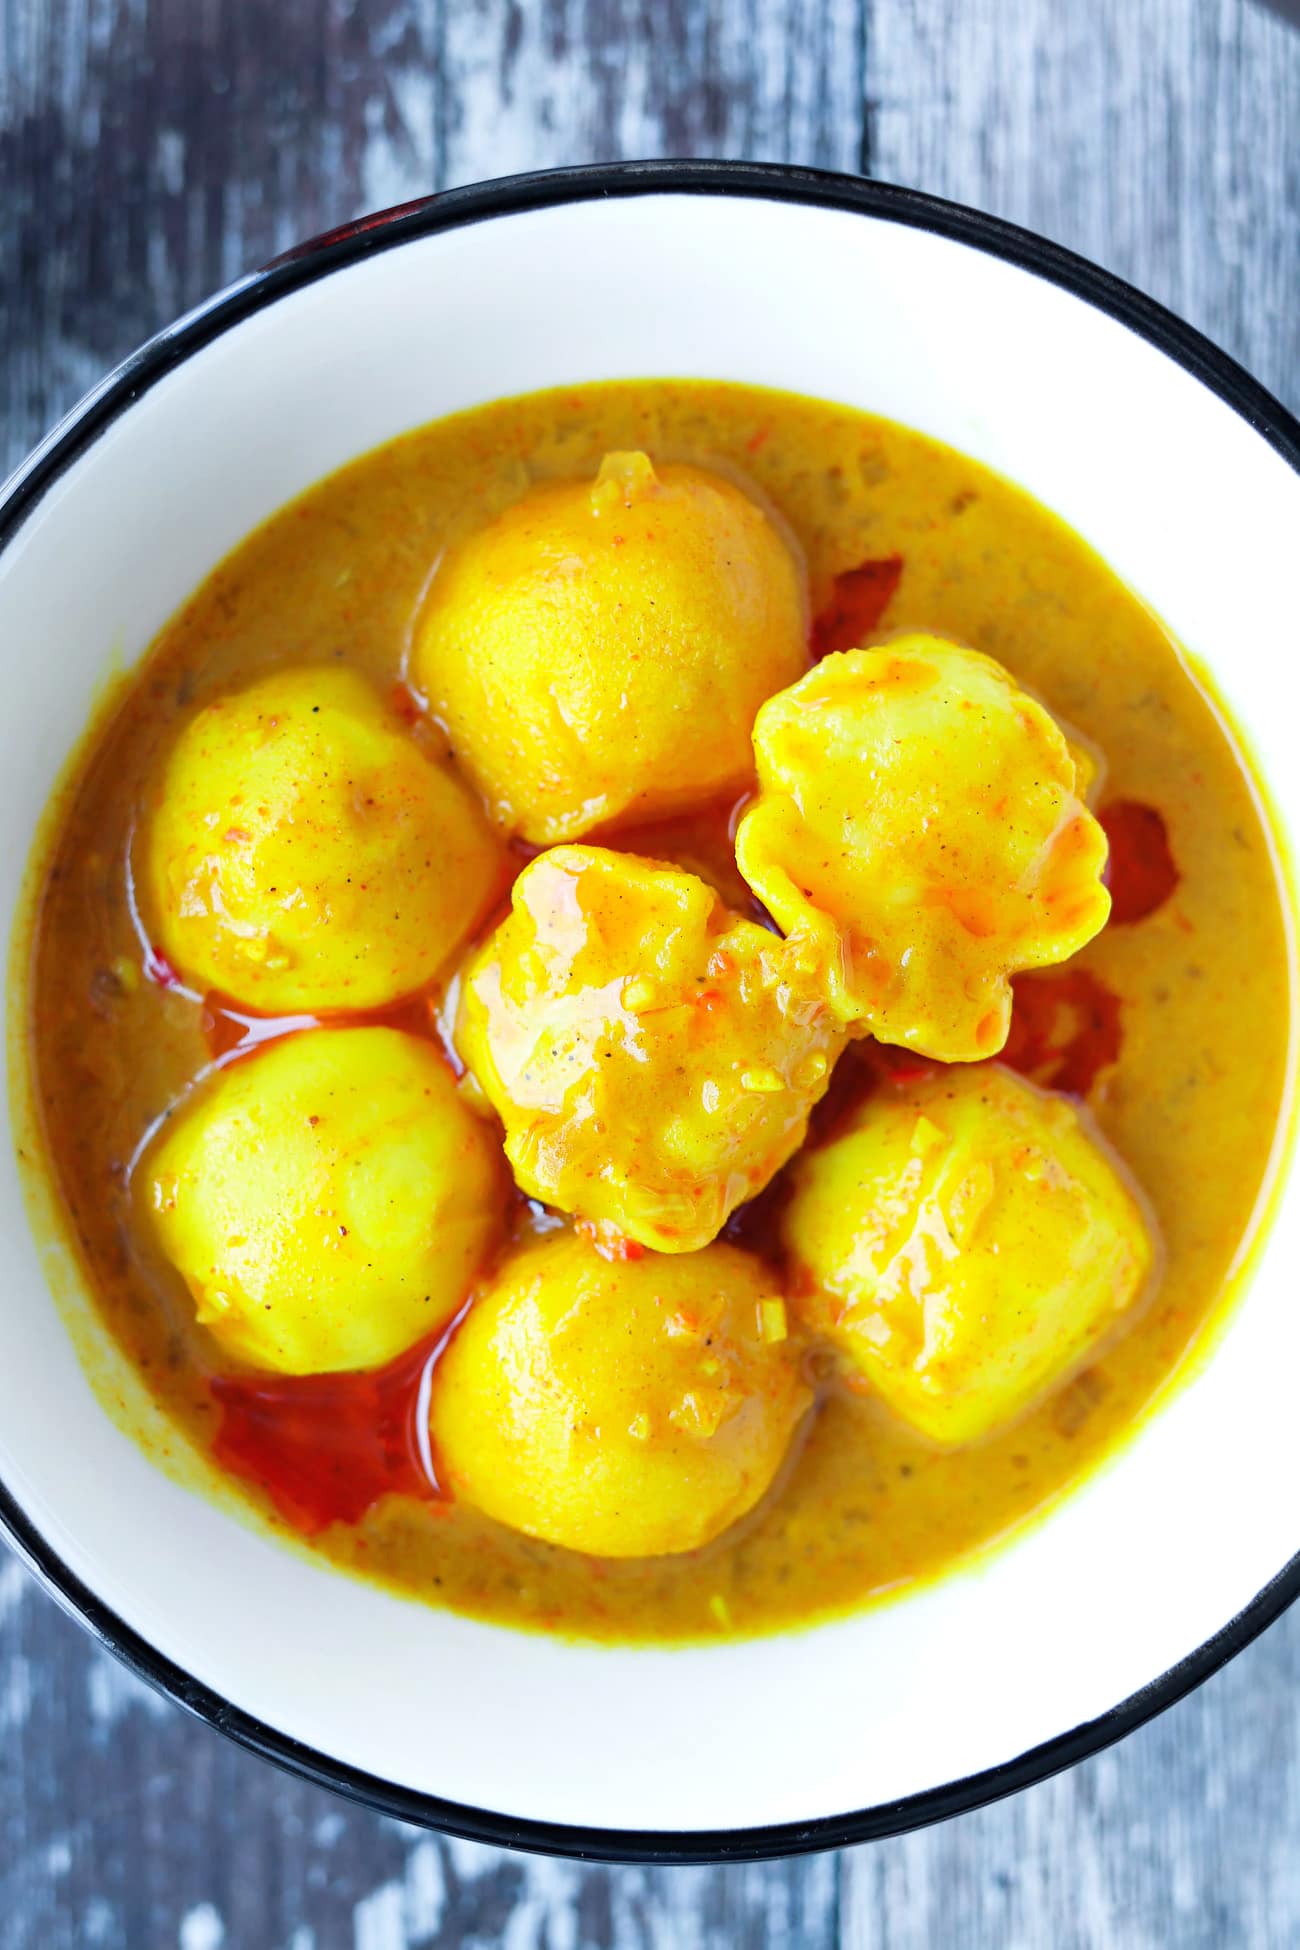 https://thatspicychick.com/wp-content/uploads/2021/09/Hong-Kong-Curry-Fish-Balls-top-view-in-bowl.jpg